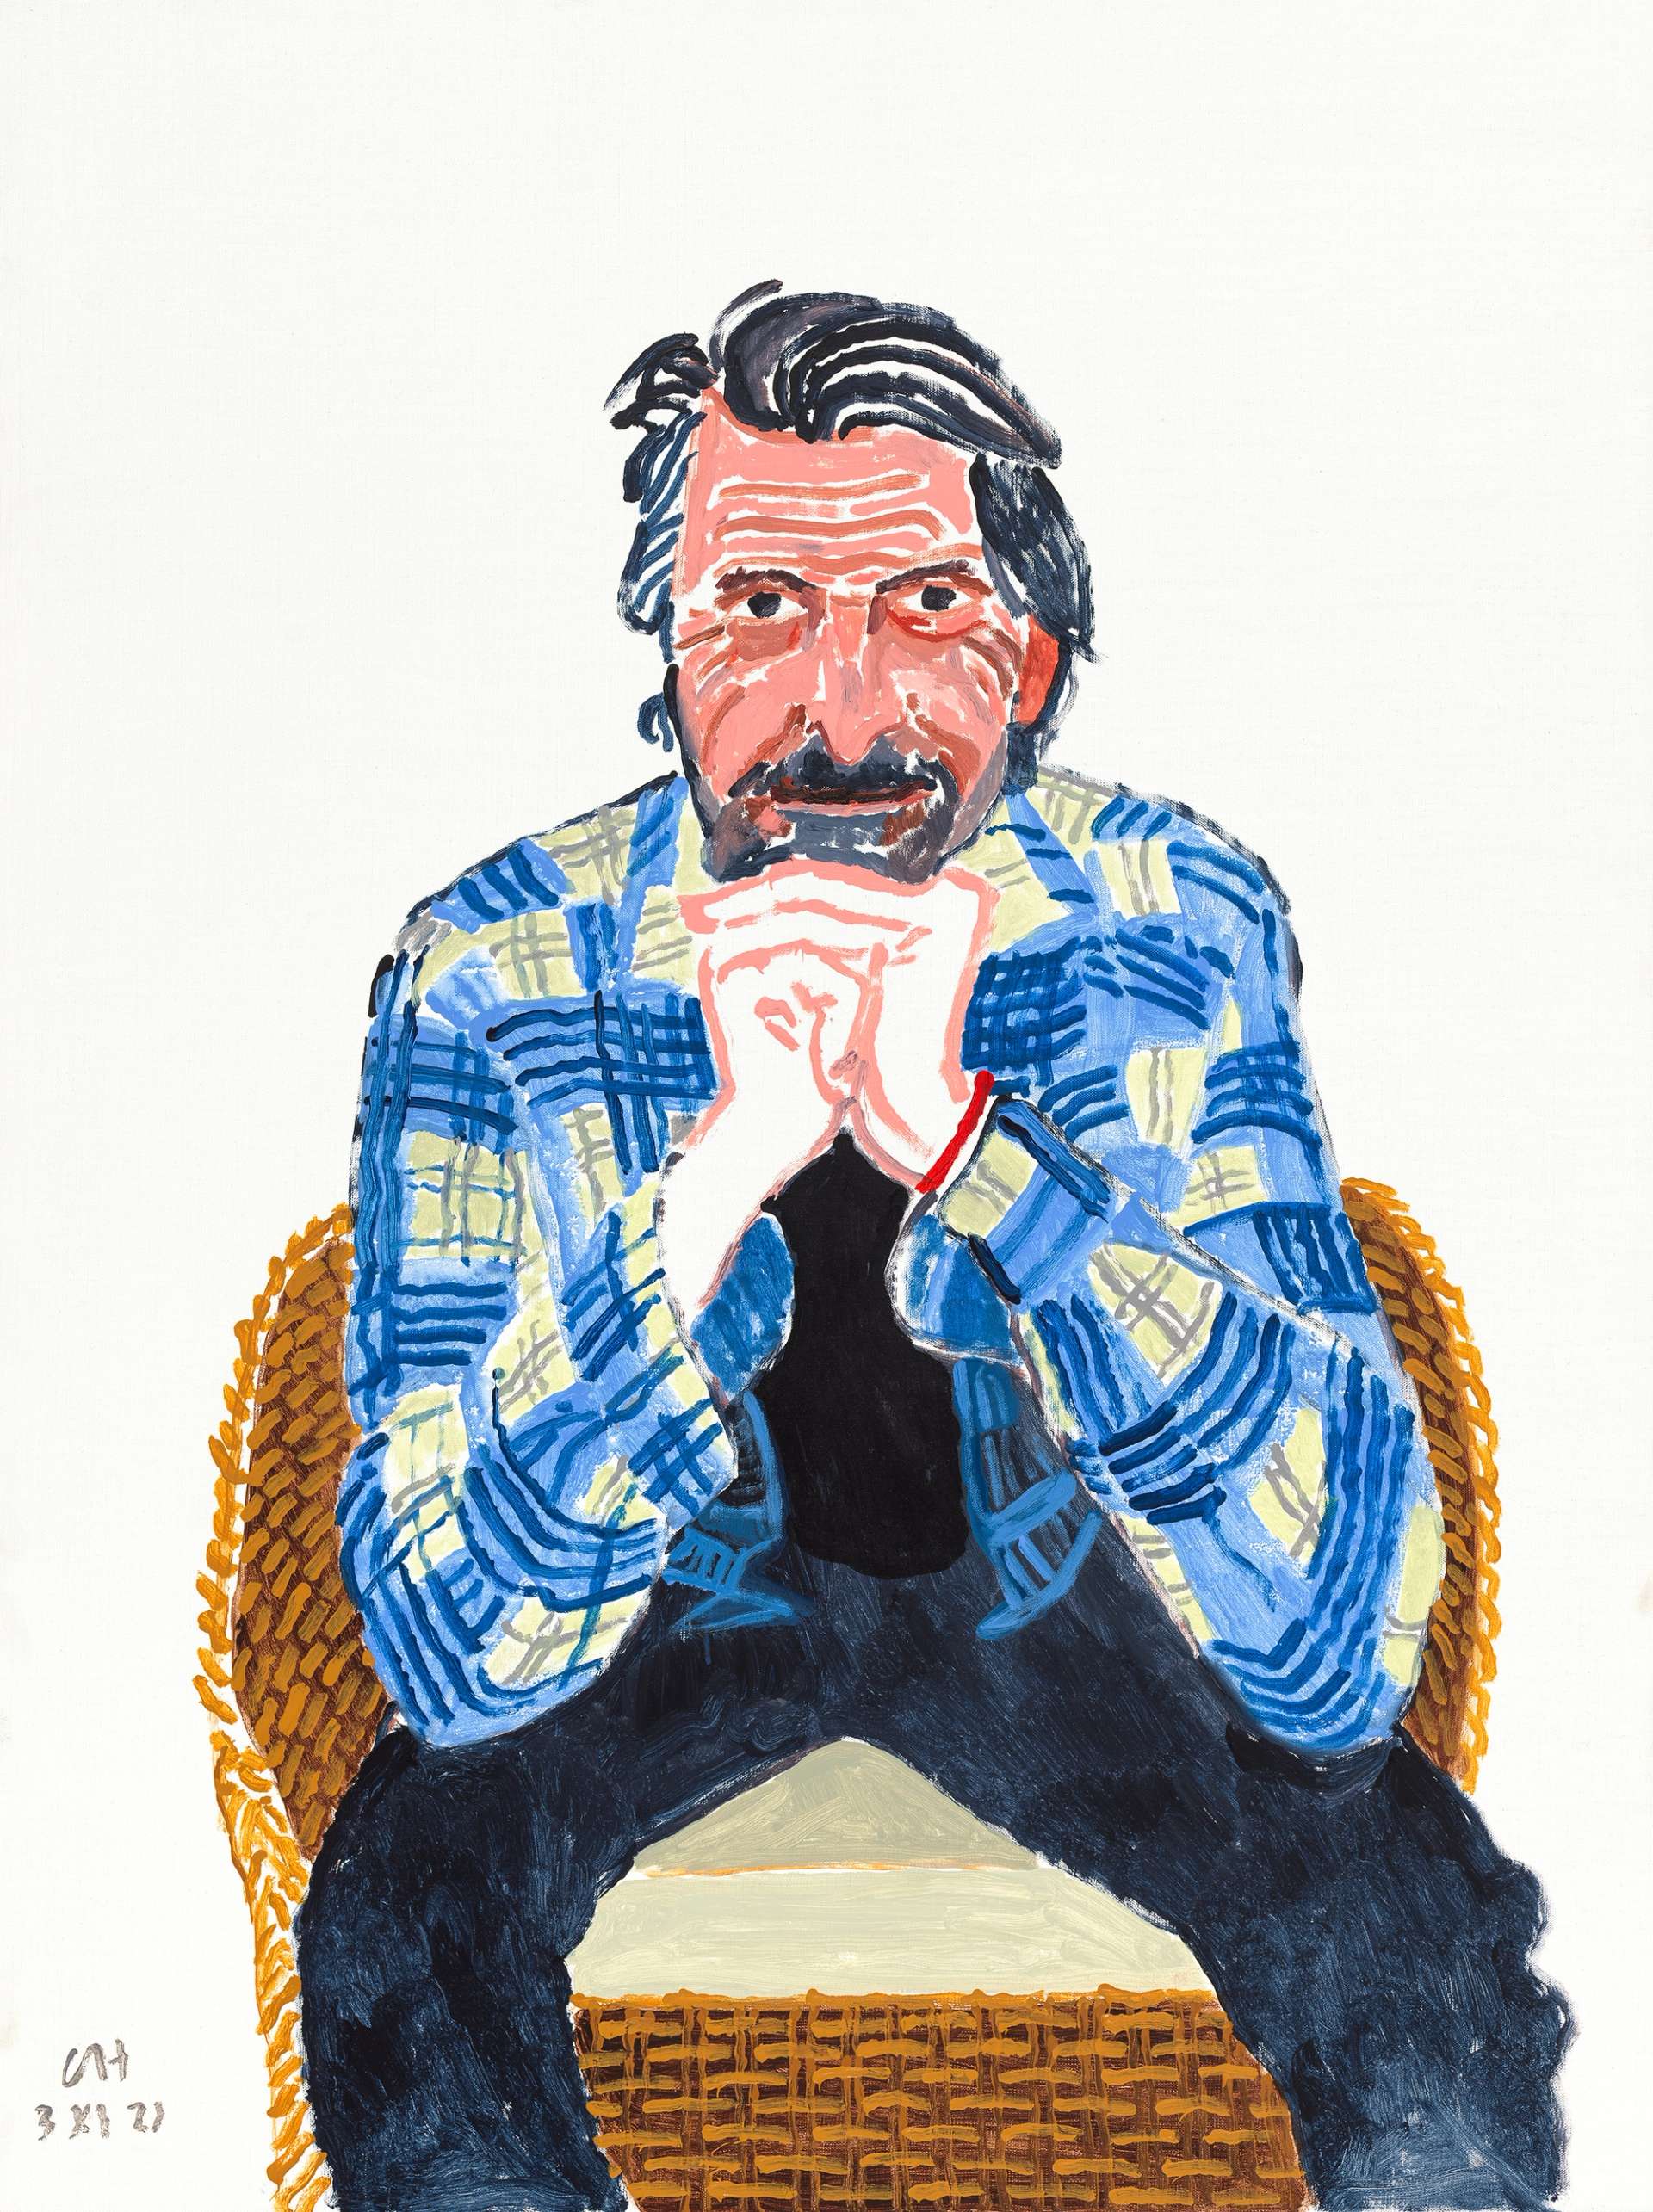 A portrait of Jean-Pierre Gonçlaves by David Hockney. Jean-Pierre sits on a seat with his elbows on his knees, leaning towards the viewer, wearing a blue plaid shirt.